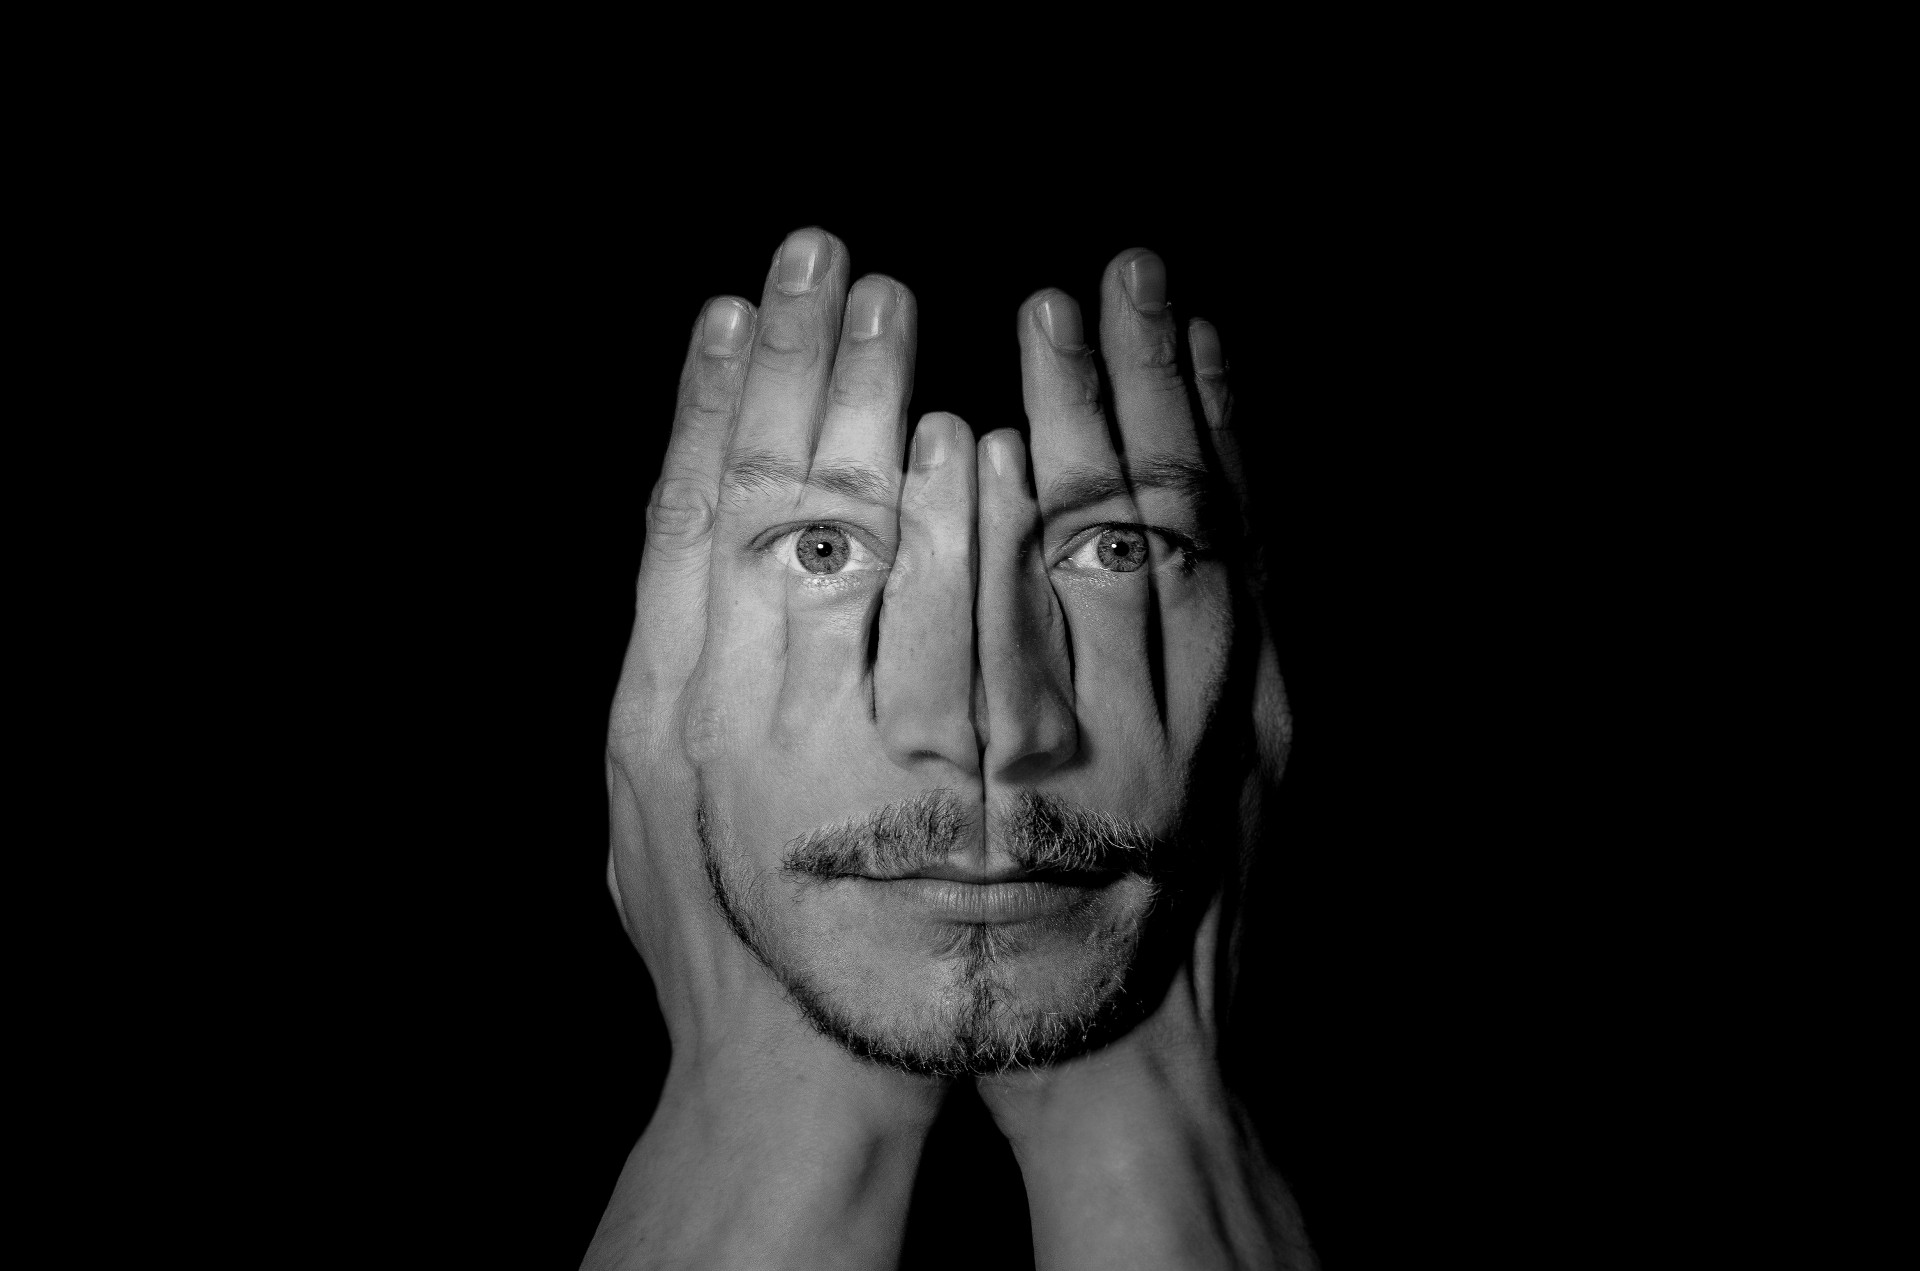 A face in the hands on the black background